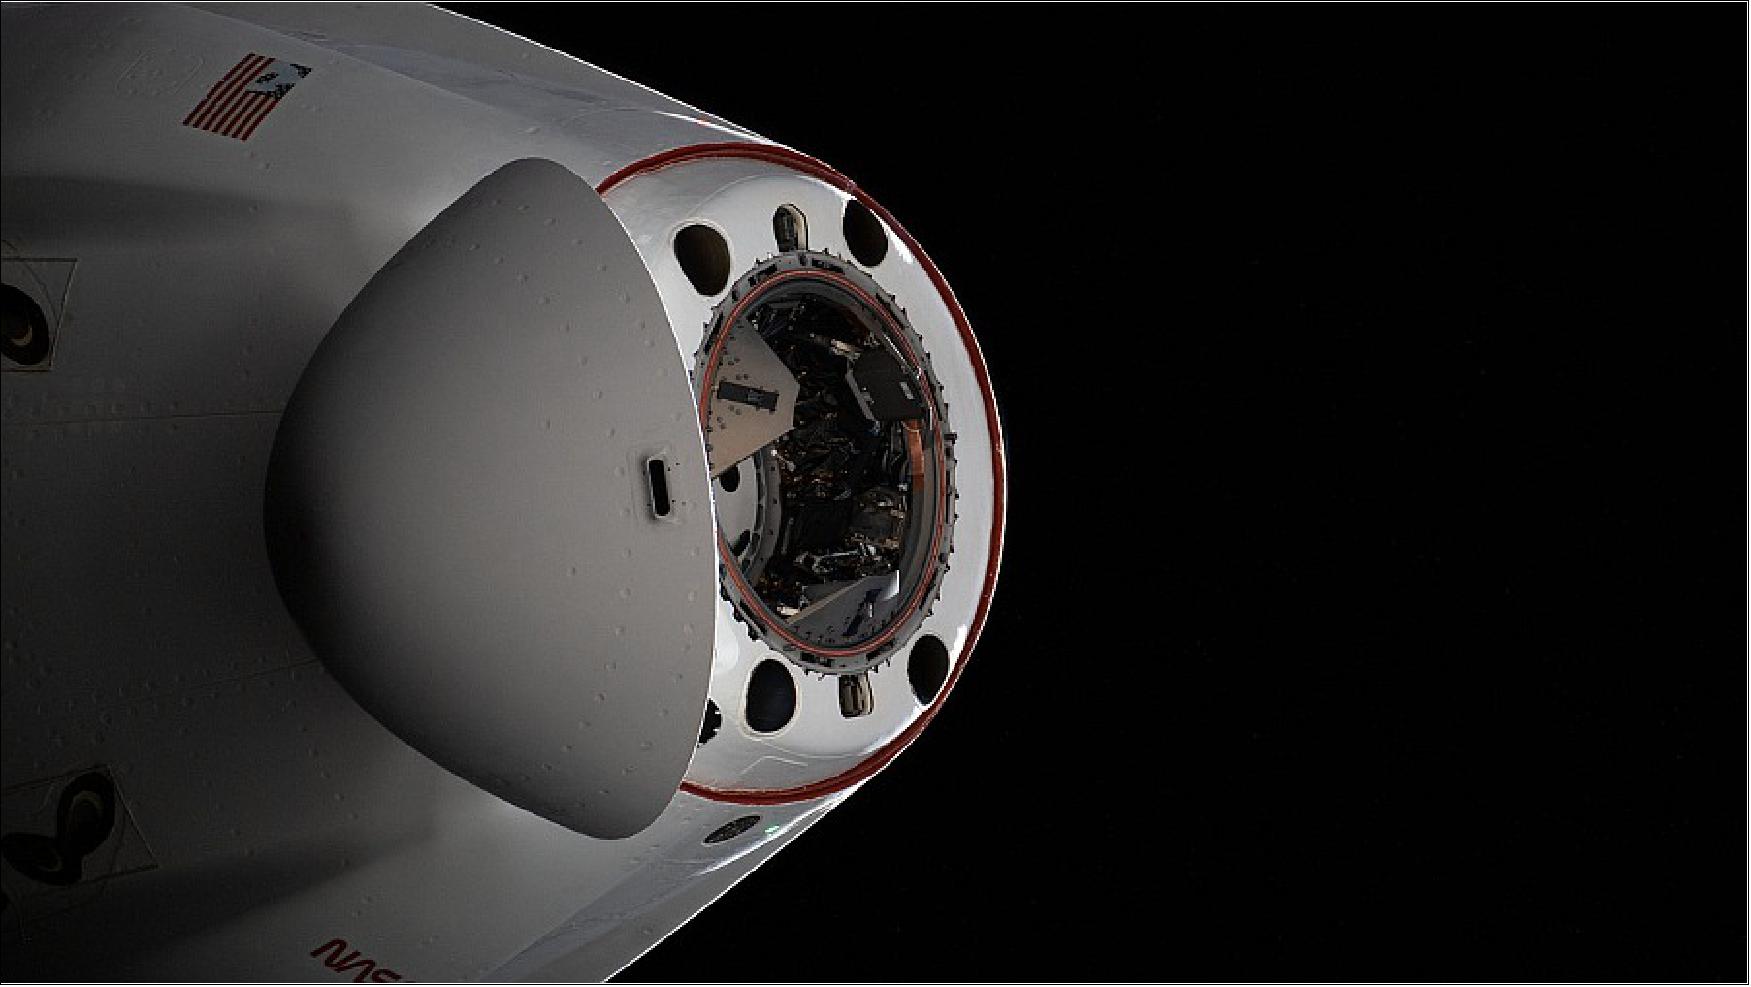 Figure 10: The pressurized capsule of the SpaceX Cargo Dragon resupply ship with its nose cone open is pictured as the vehicle departs the International Space Station on Jan. 23, 2022 (image credit: NASA TV)